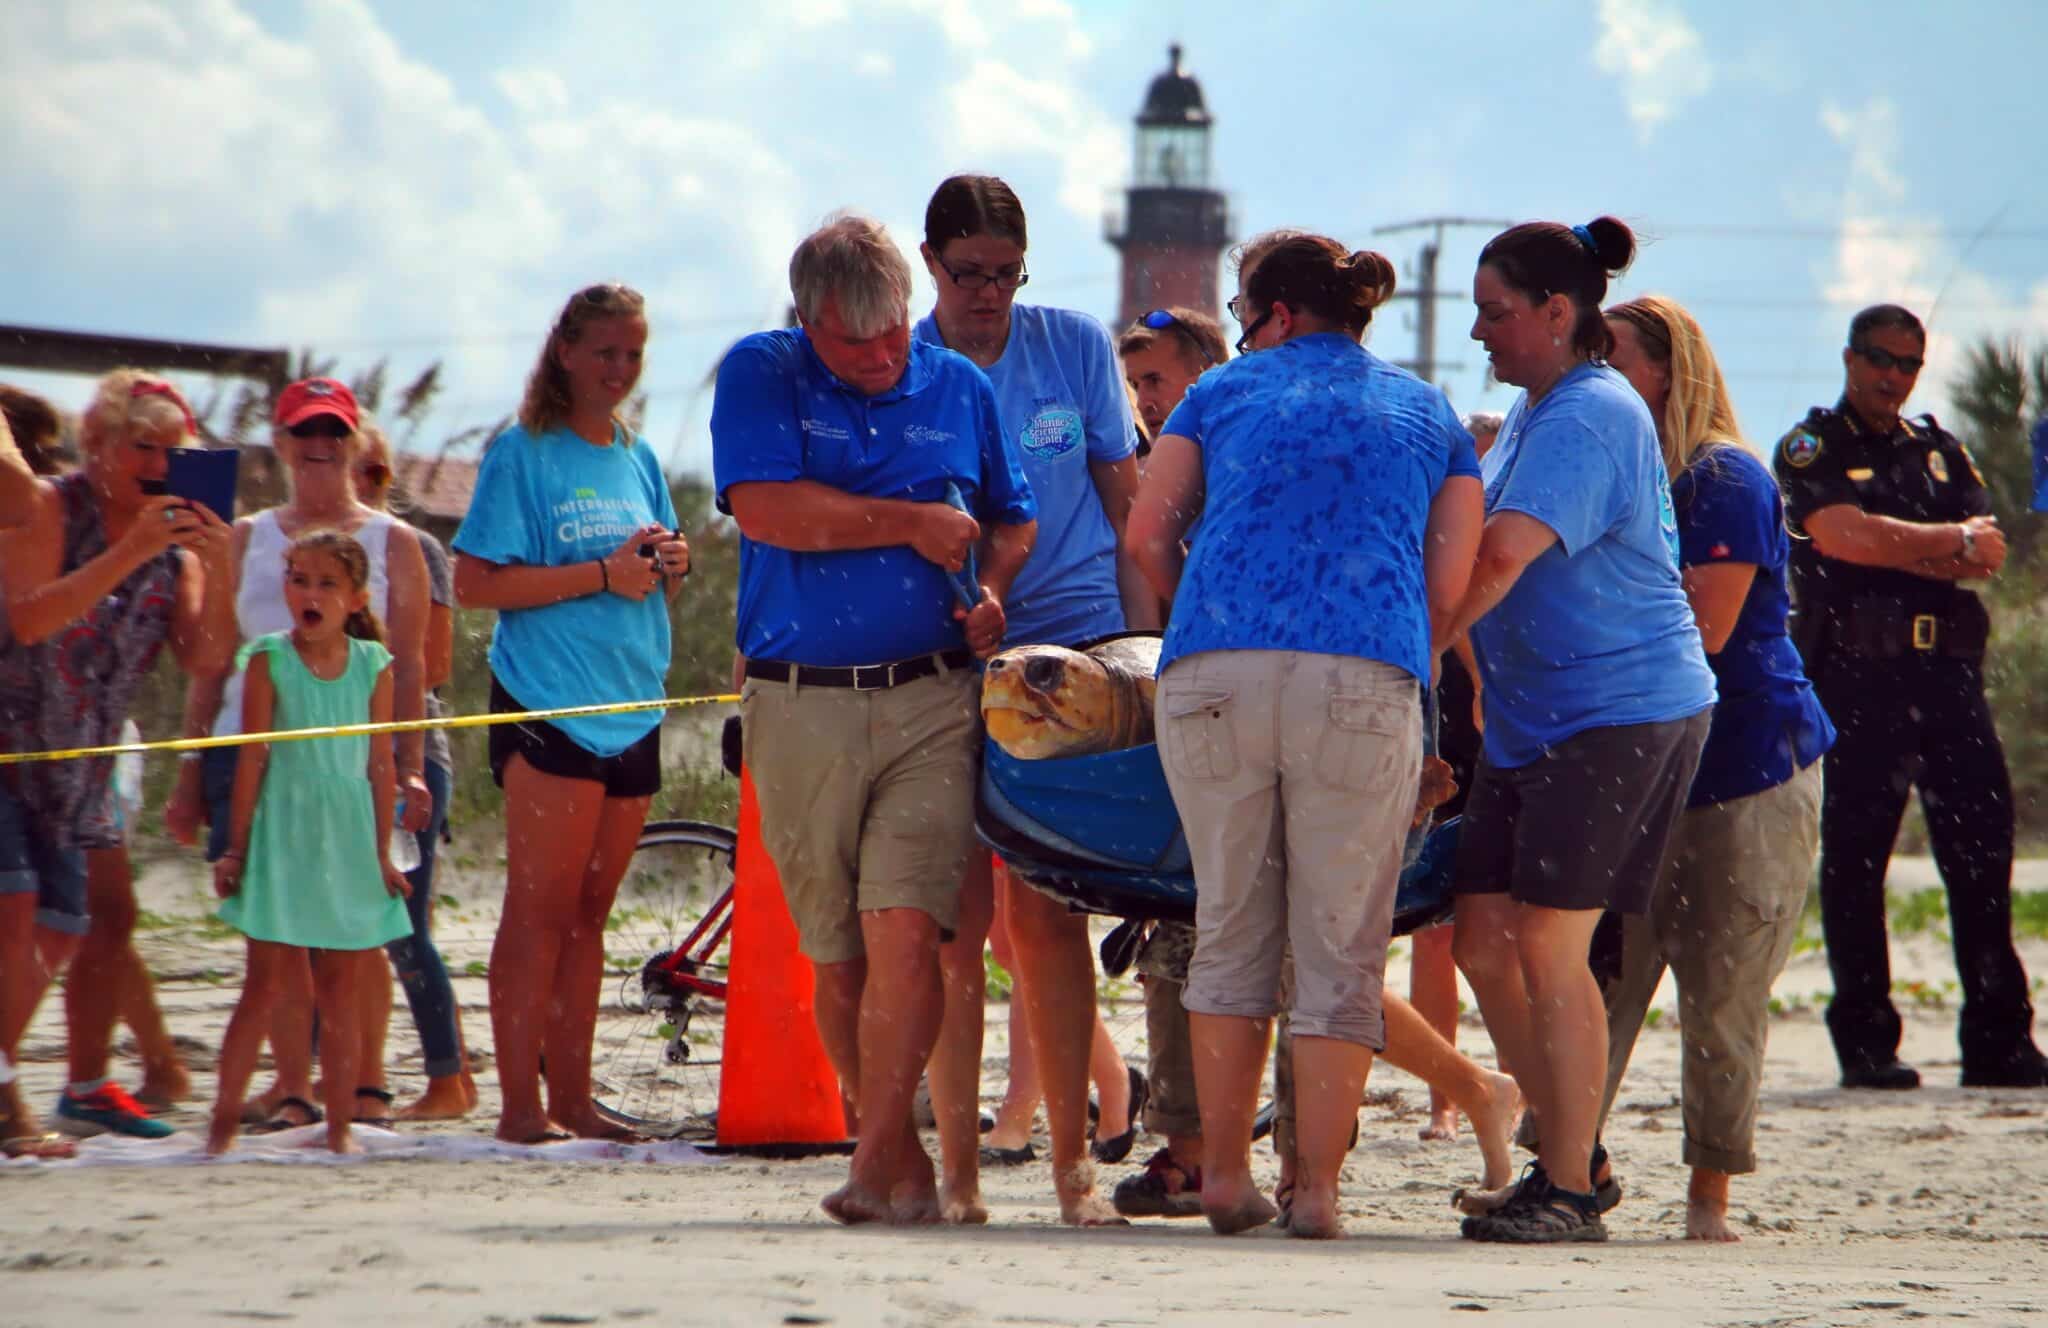 Carrying a rehabbed Rio for release back into the Atlantic (Credit: Bill Rockwell)